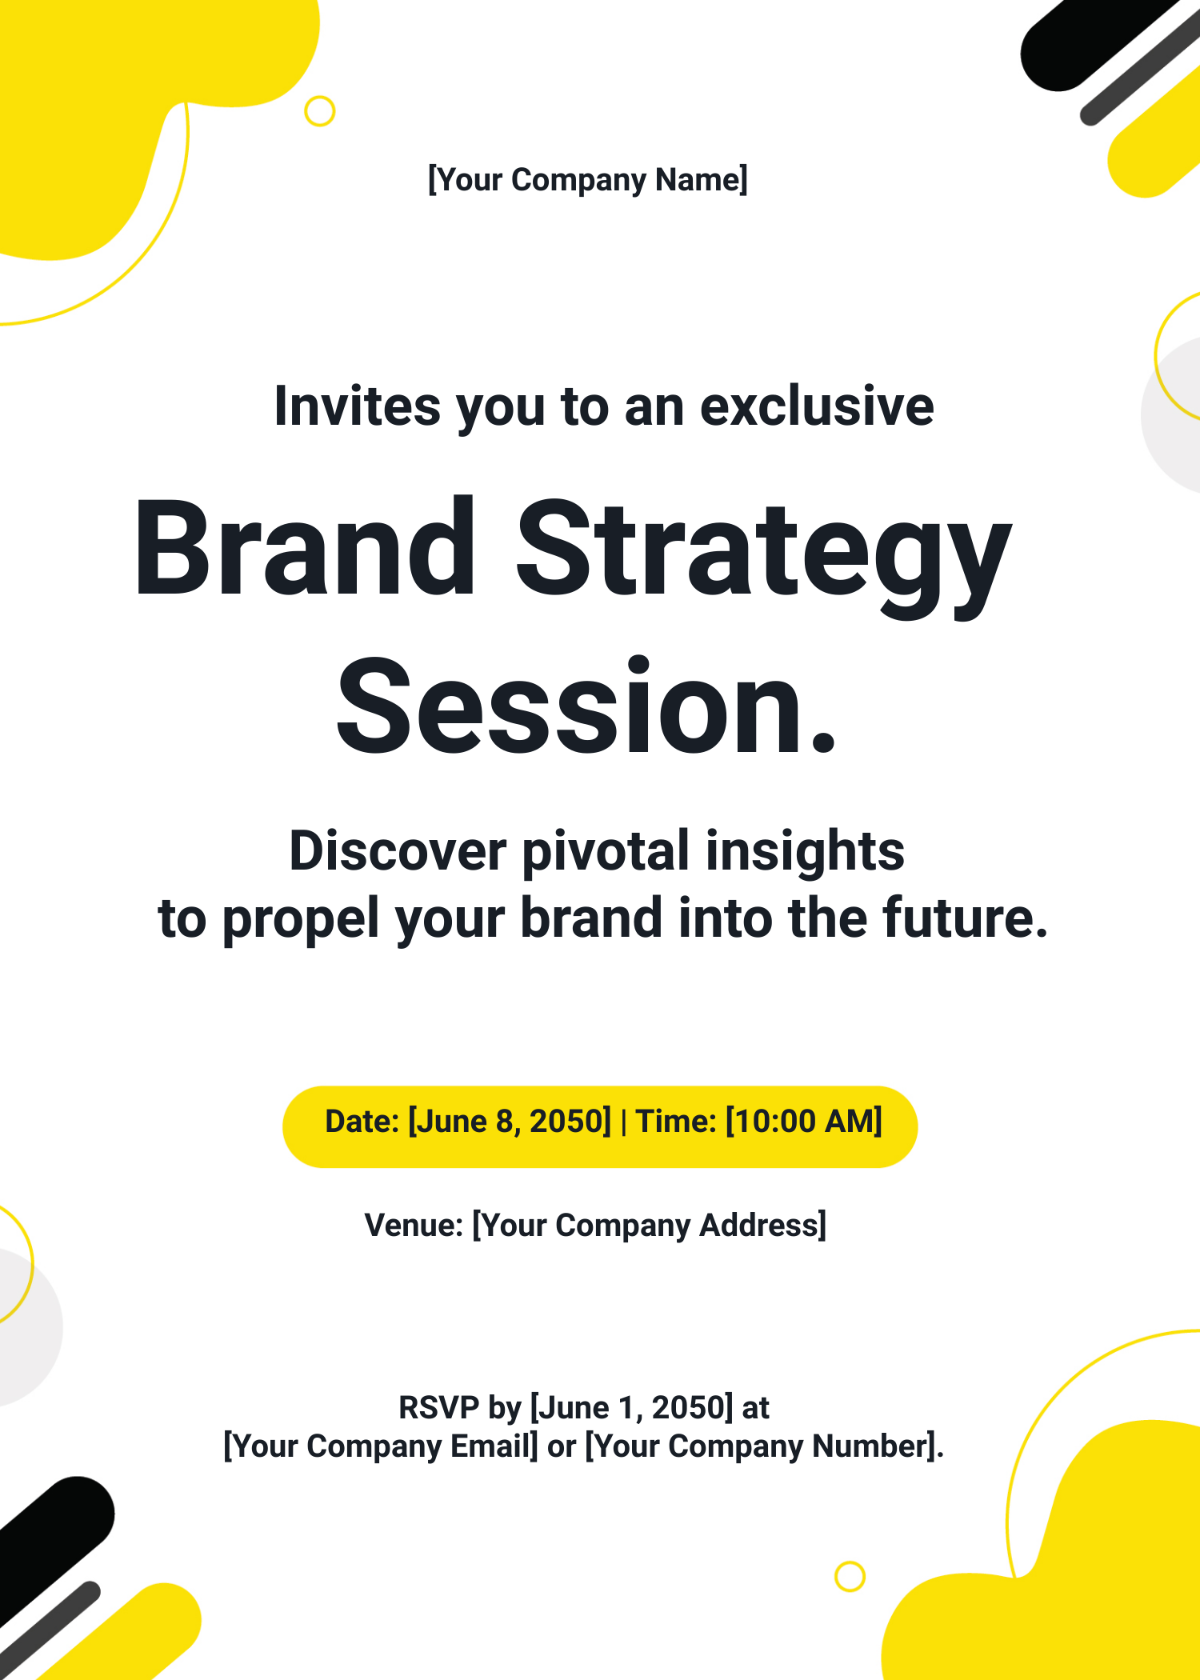 Brand Strategy Session Invitation Card Template